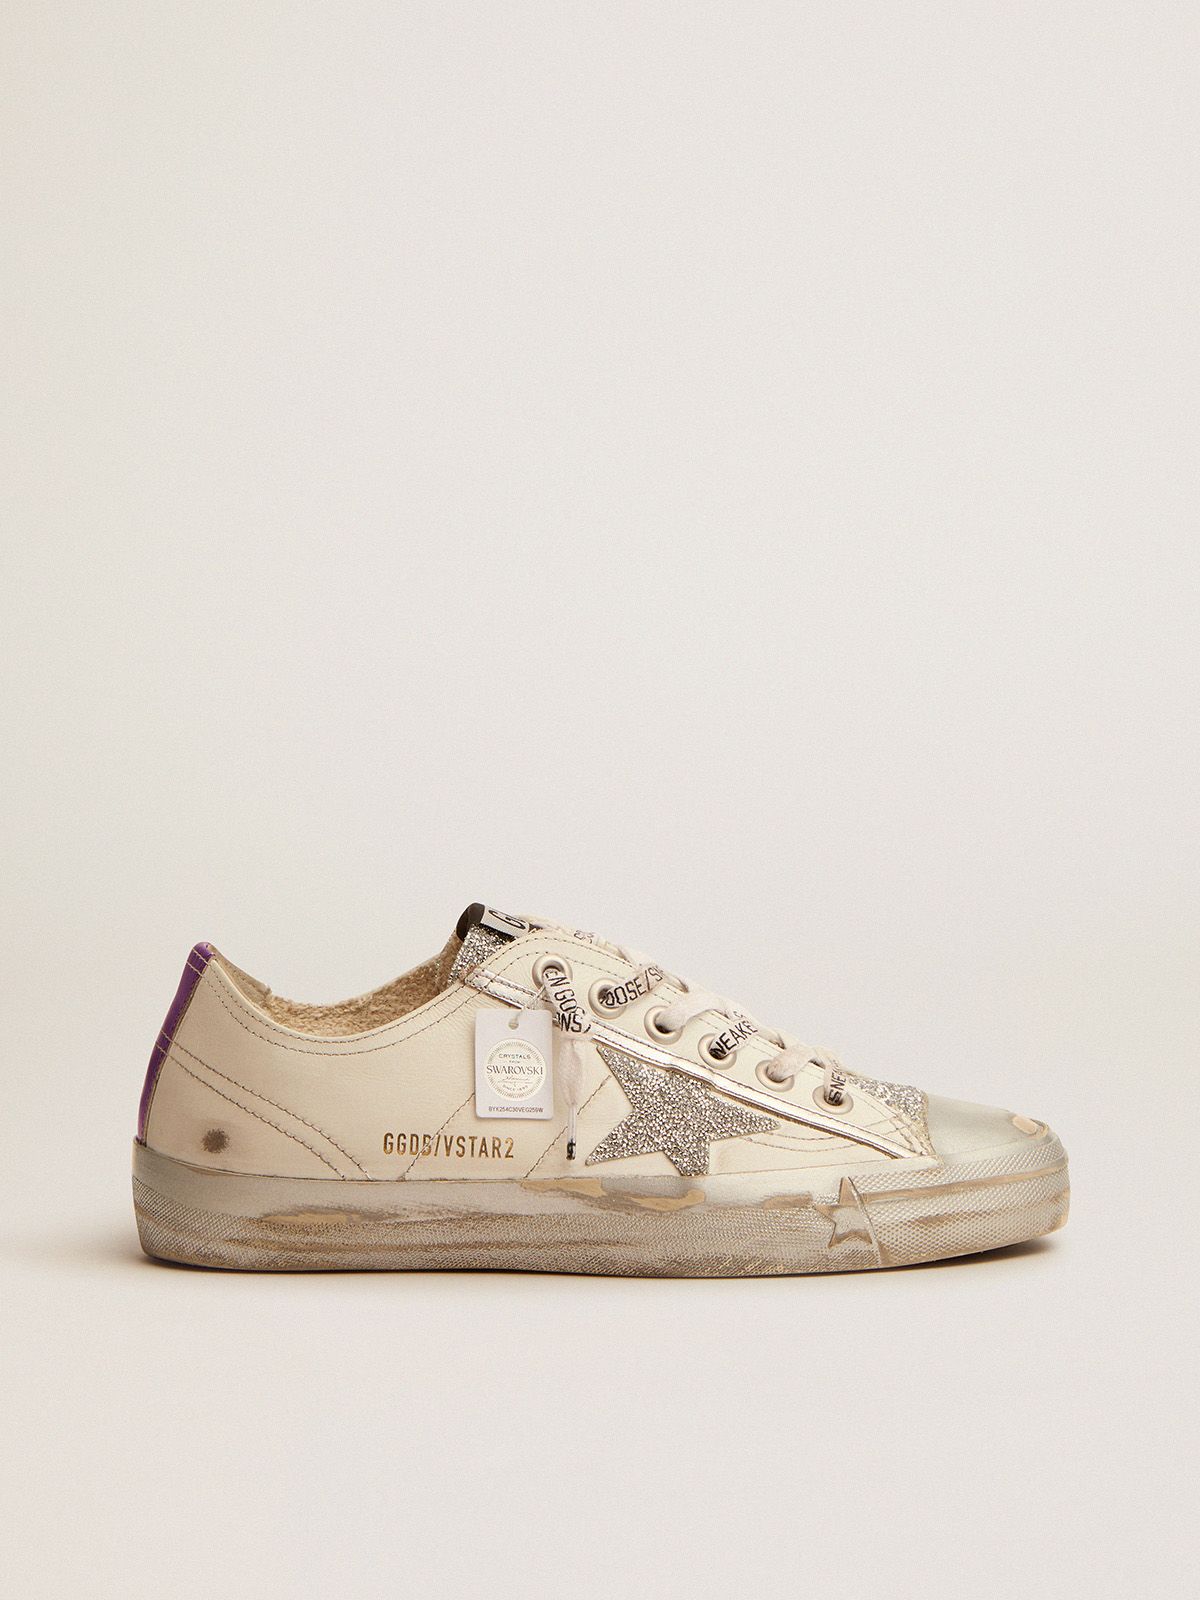 golden goose crystals in and leather LTD sneakers white V-Star